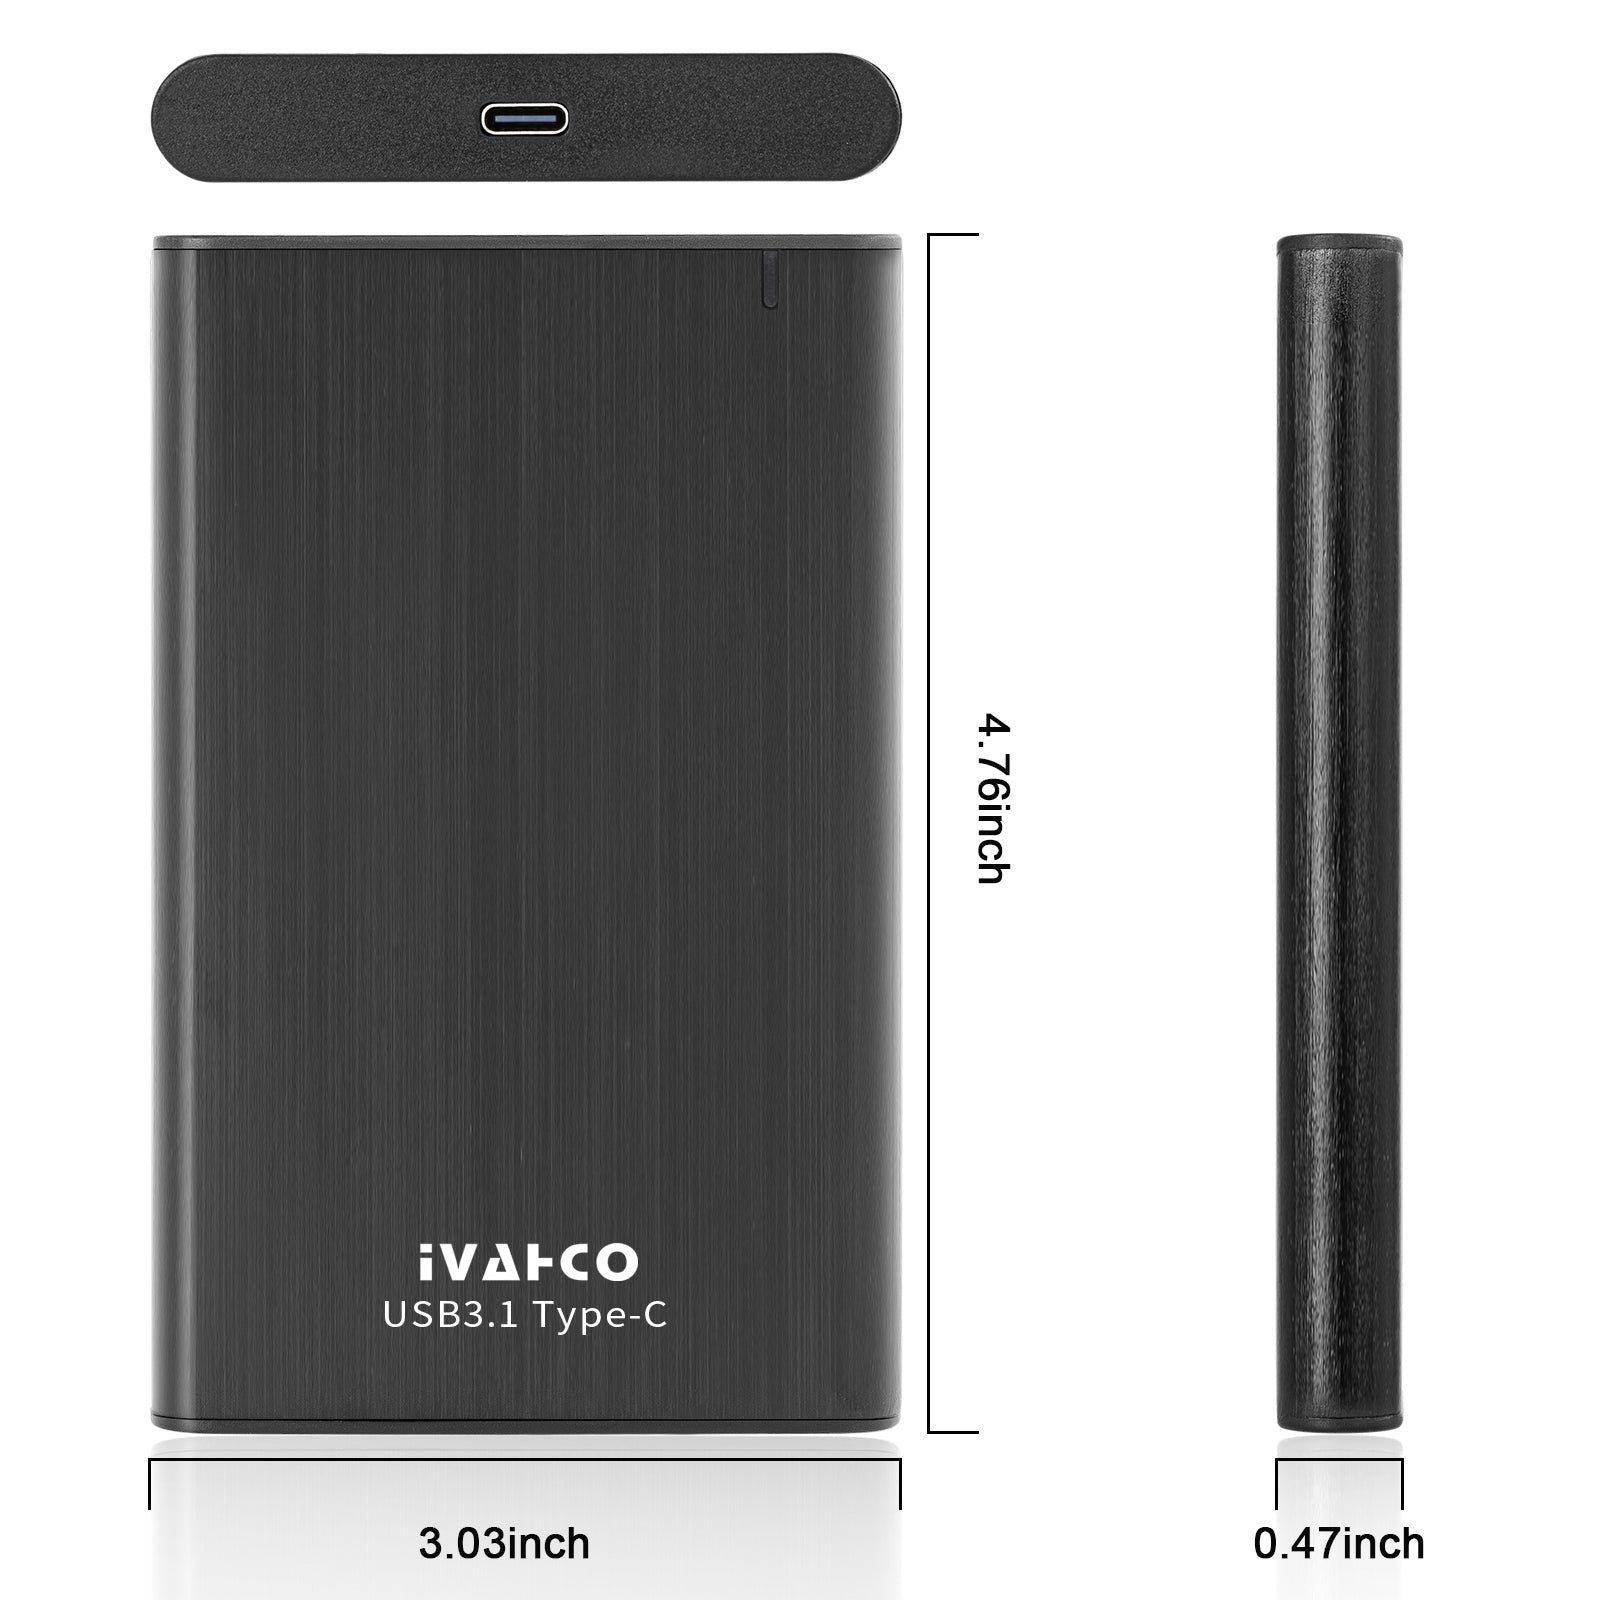 IVAHCO 1TB Type-C USB3.1 2.5" HDD External Case Plug and Play Brushed Metal Solid State Drive Enclosure - Black